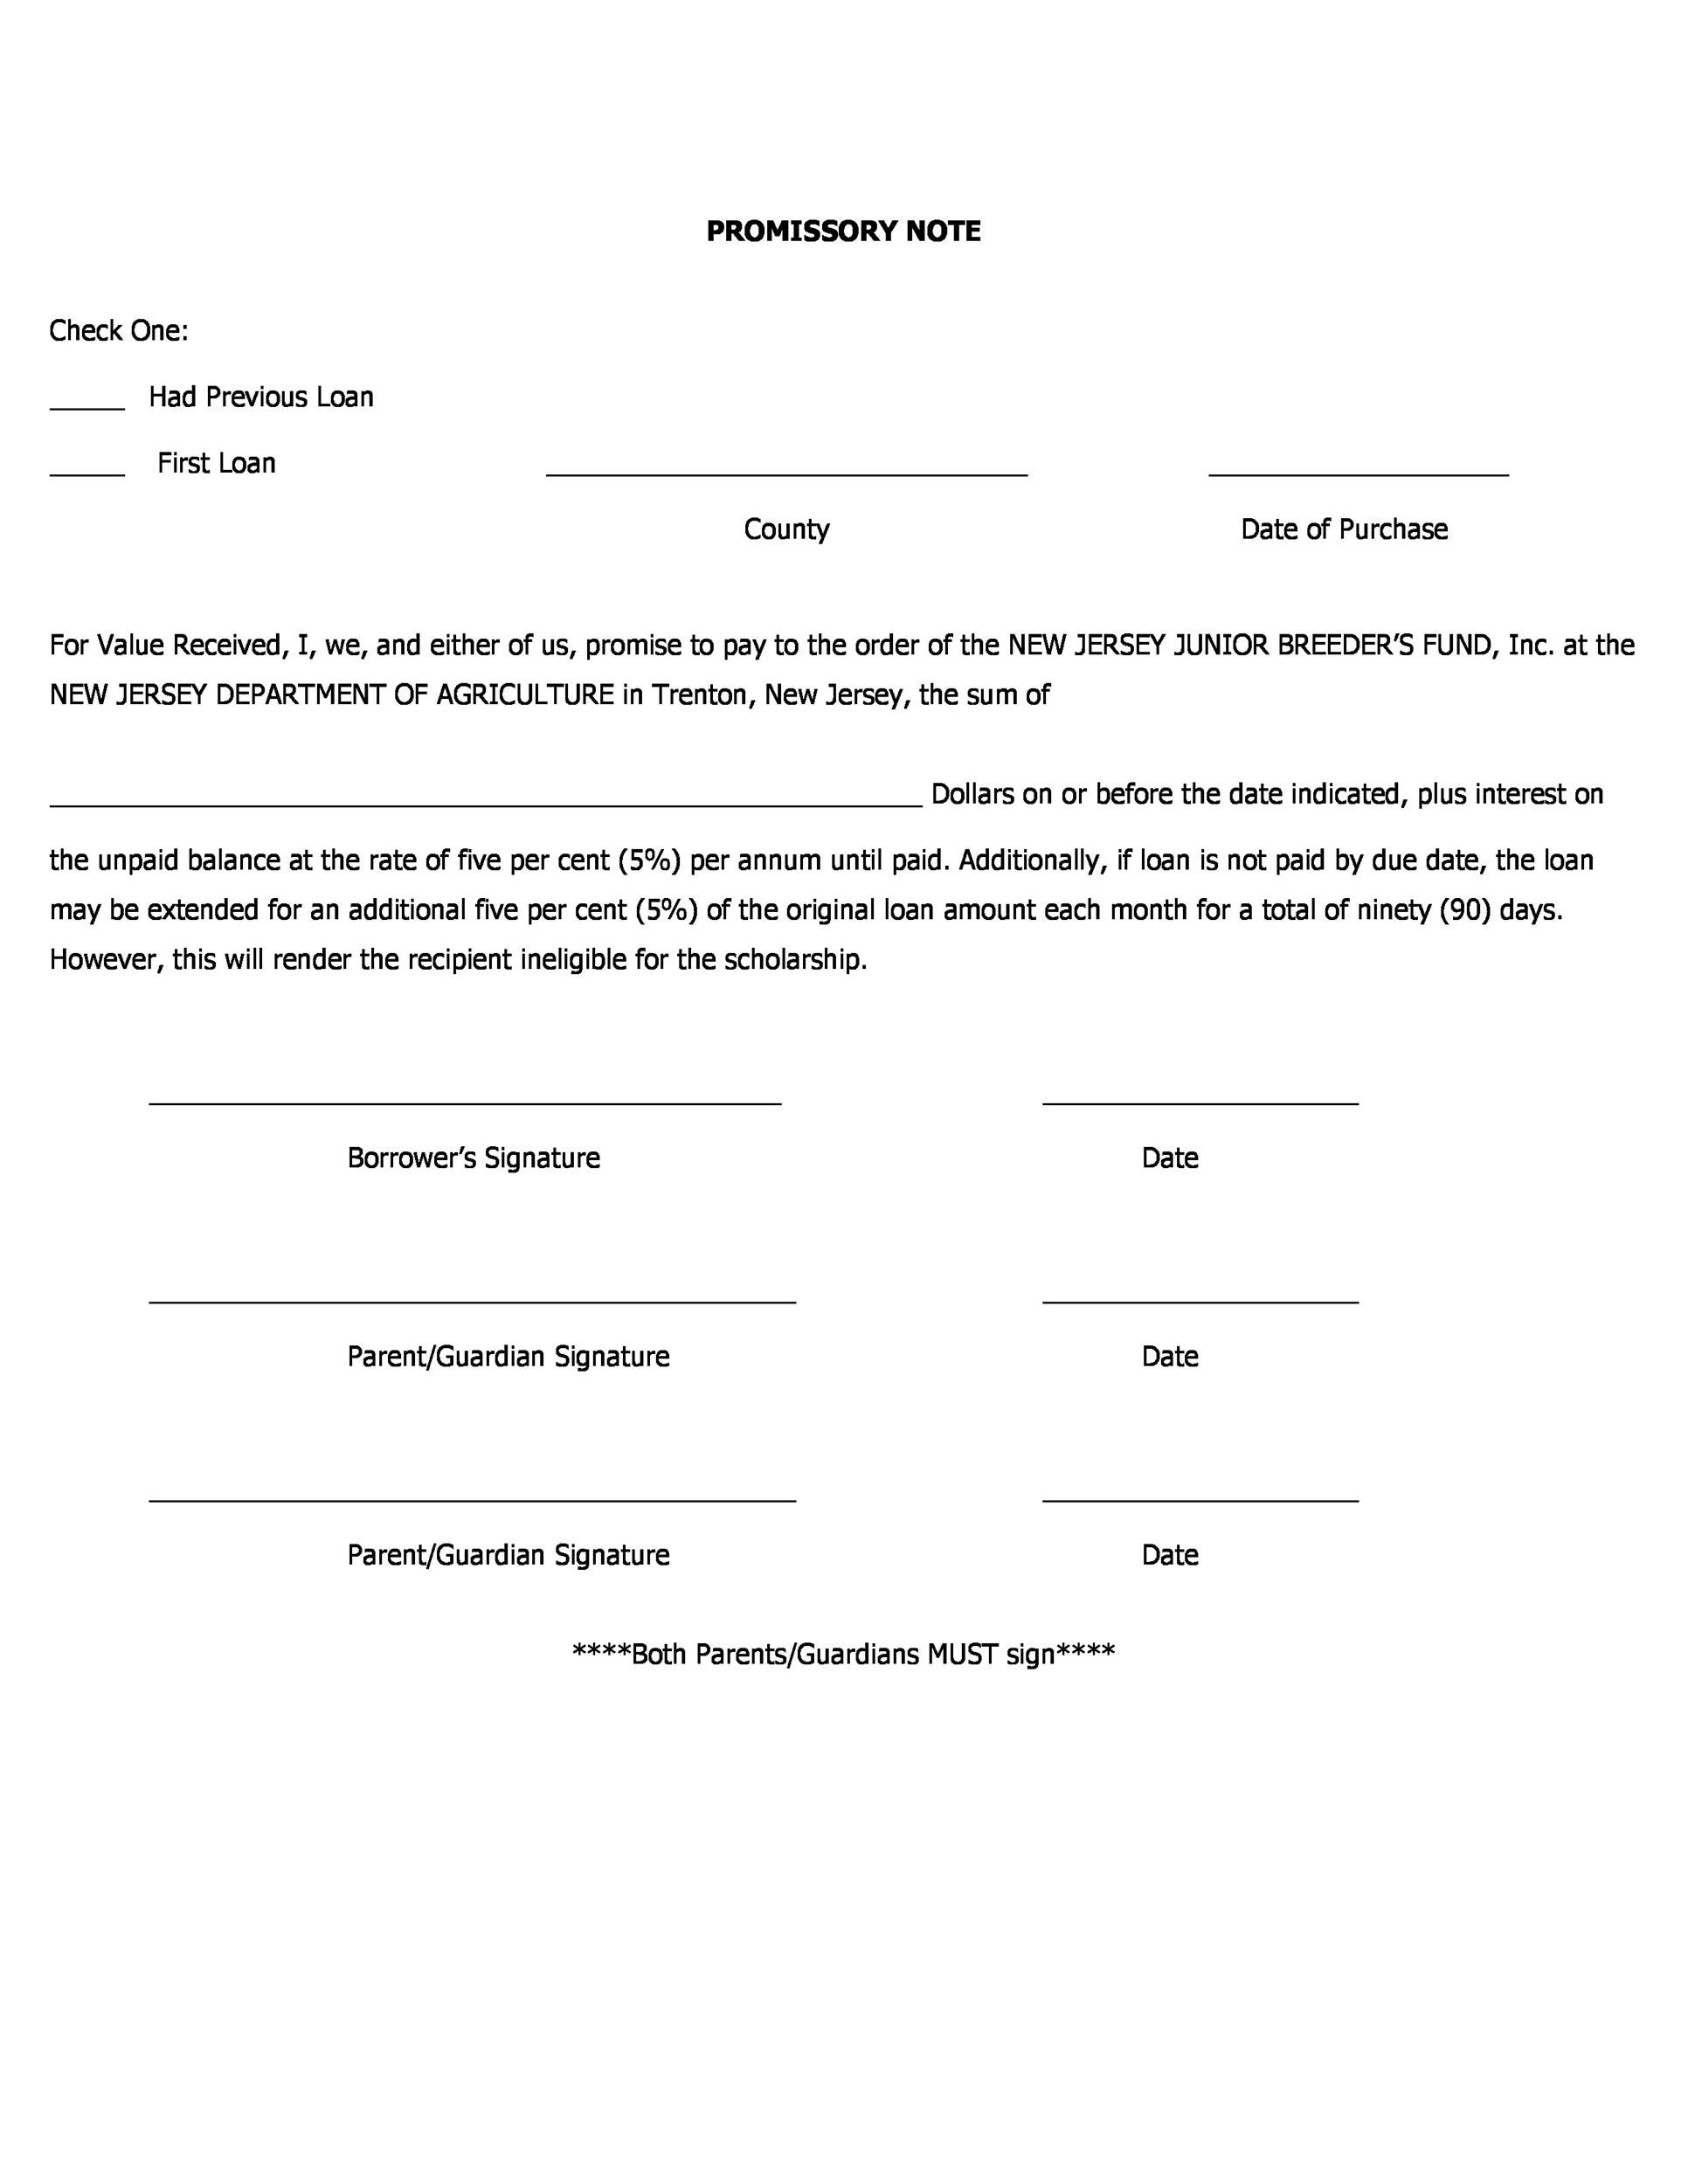 45 FREE Promissory Note Templates Forms Word PDF TemplateLab